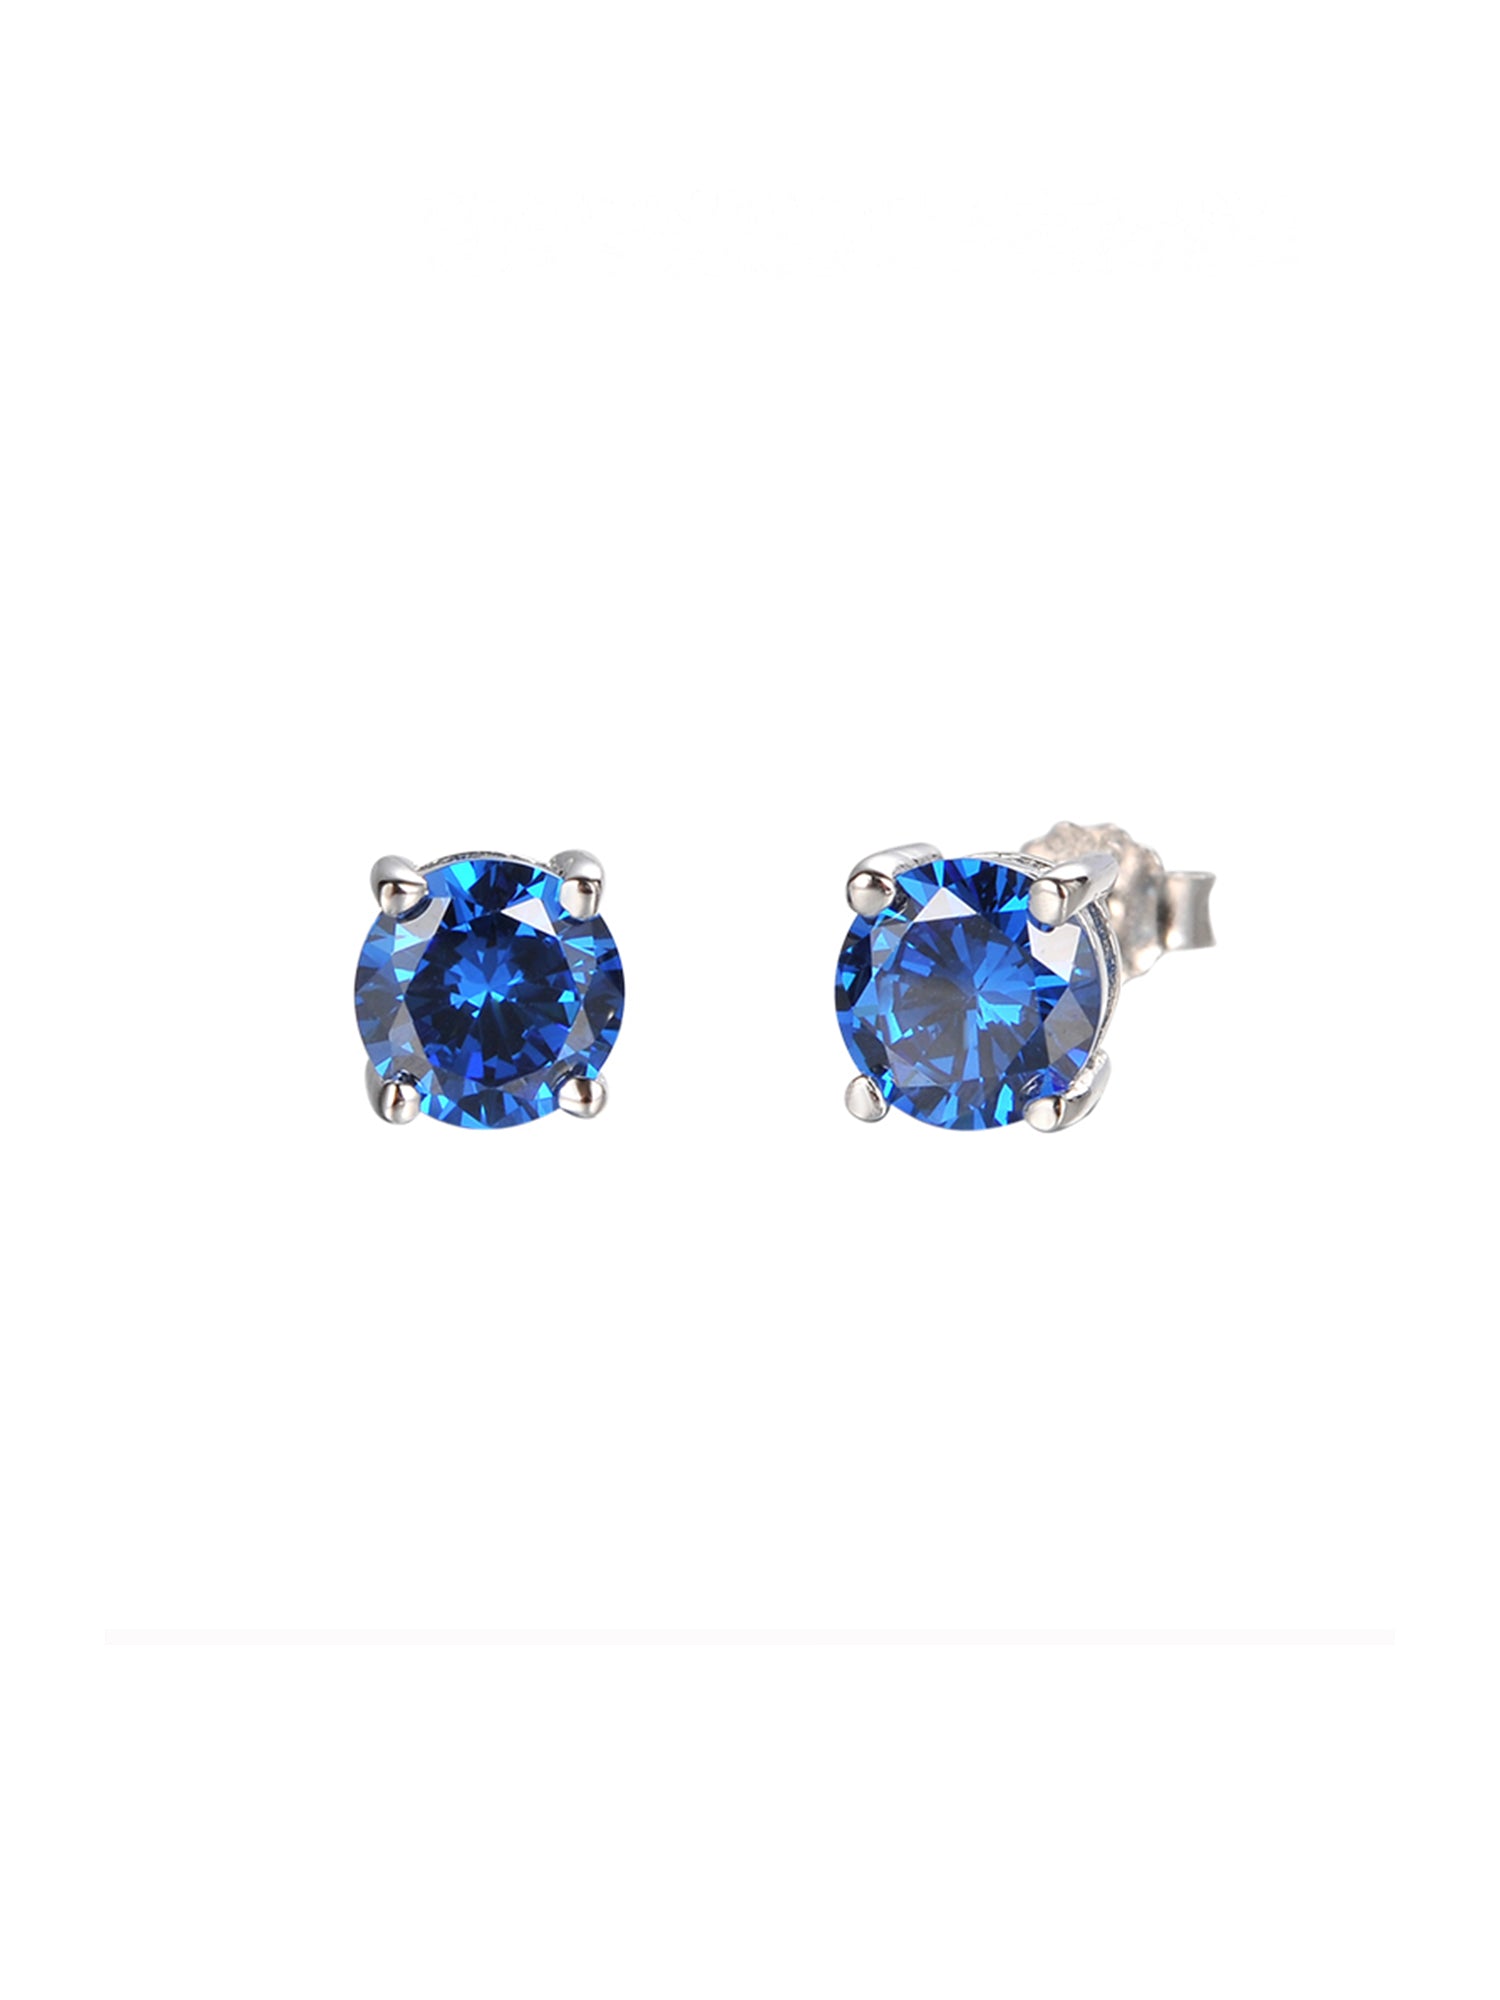 BLUE SAPPHIRE SOLITAIRE EARRING STUDS-5